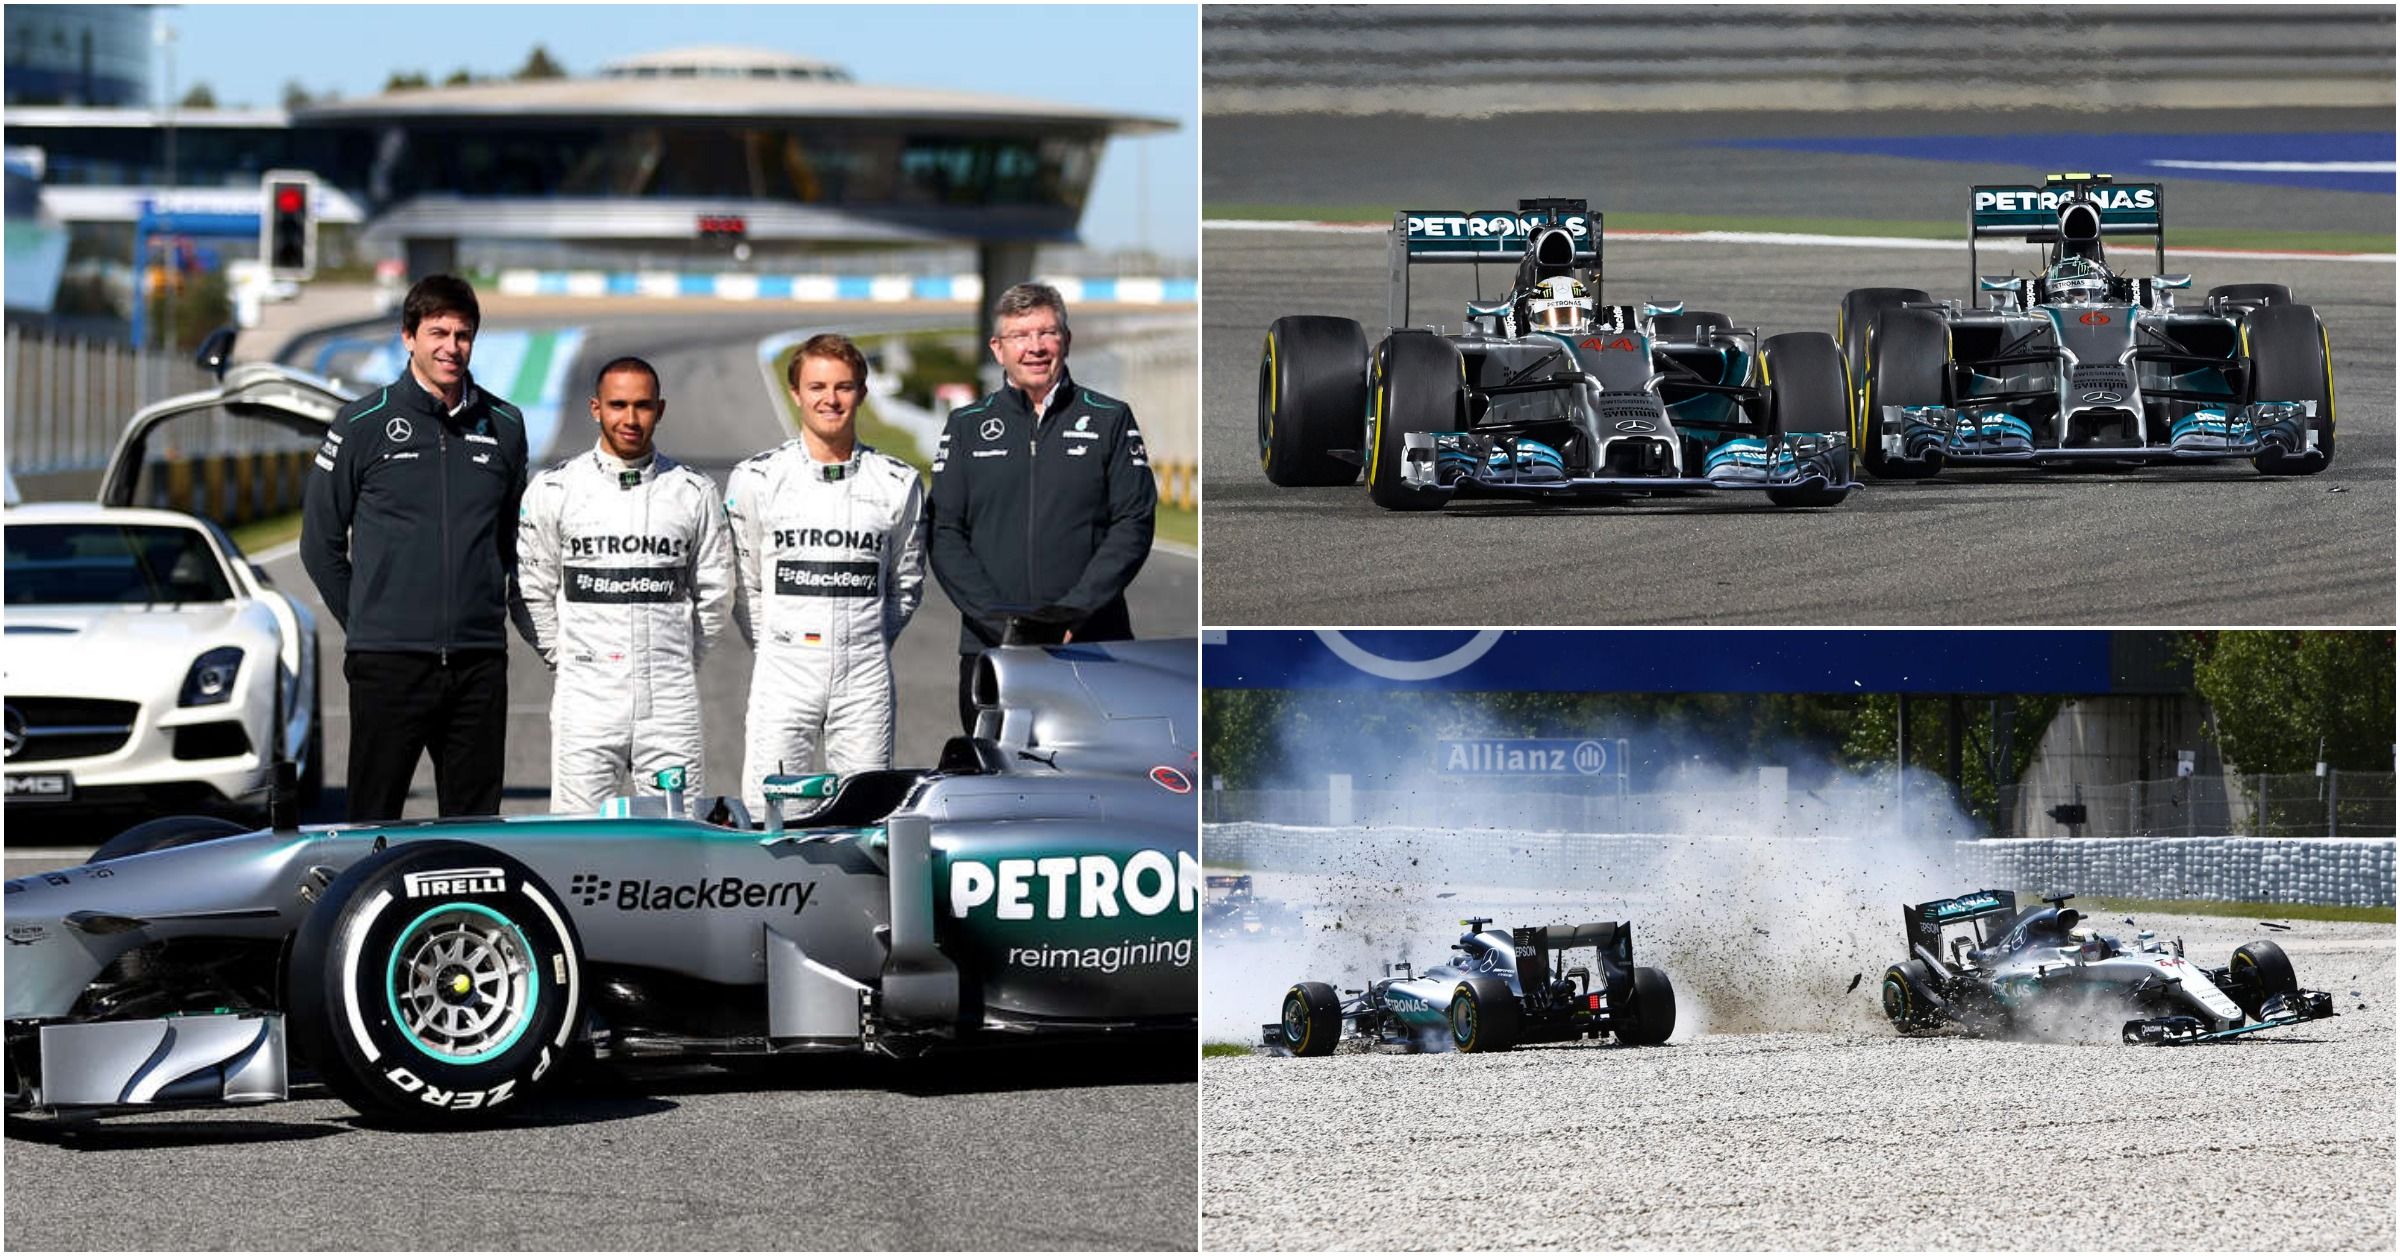 15 Things About Mercedes AMG F1 The Team Wants To Keep On The DL